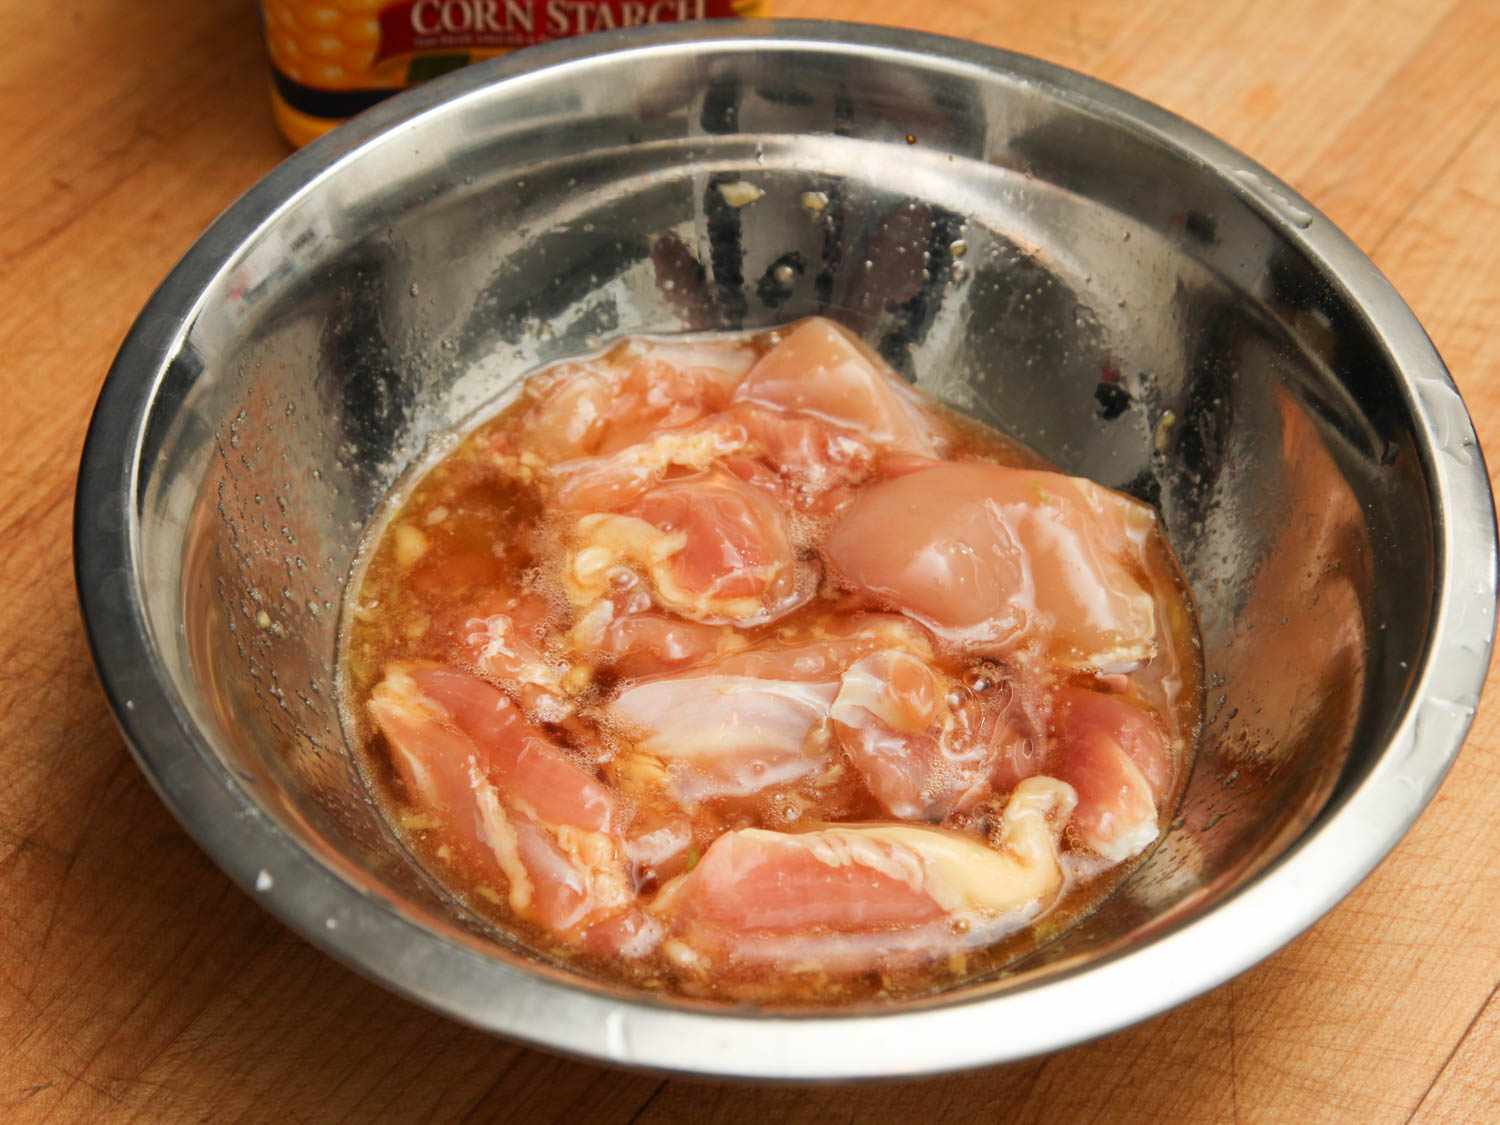 Boneless chicken thighs in a thin marinade before frying.